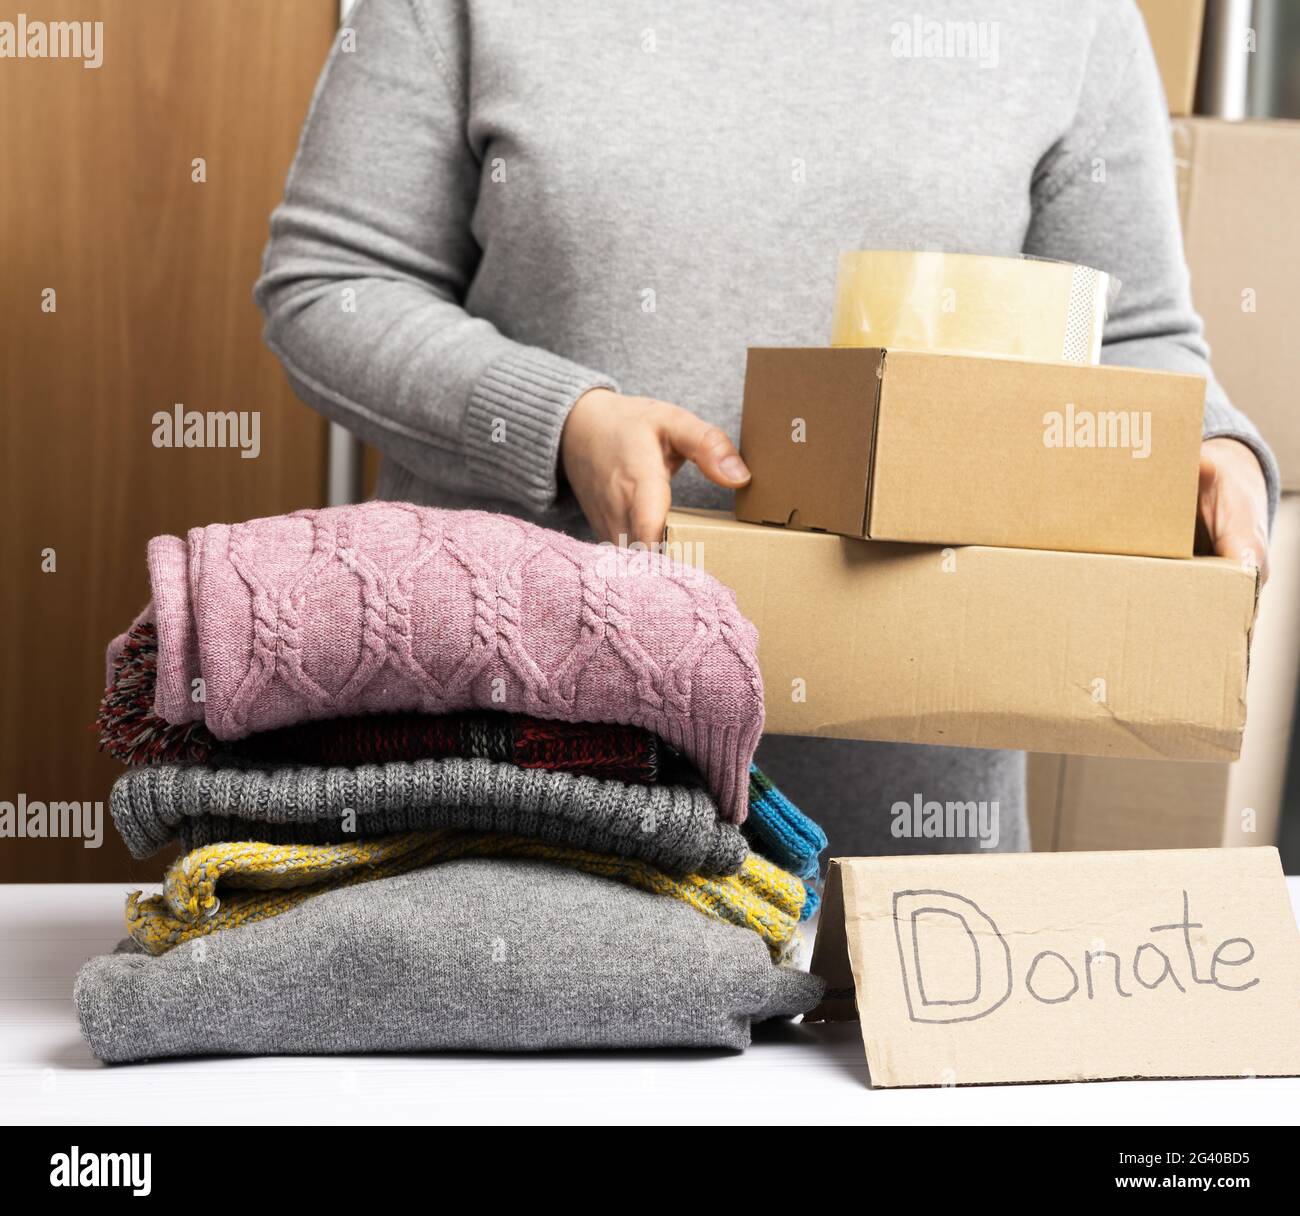 Woman in a gray sweater is packing clothes in a box, the concept of assistance and volunteering Stock Photo